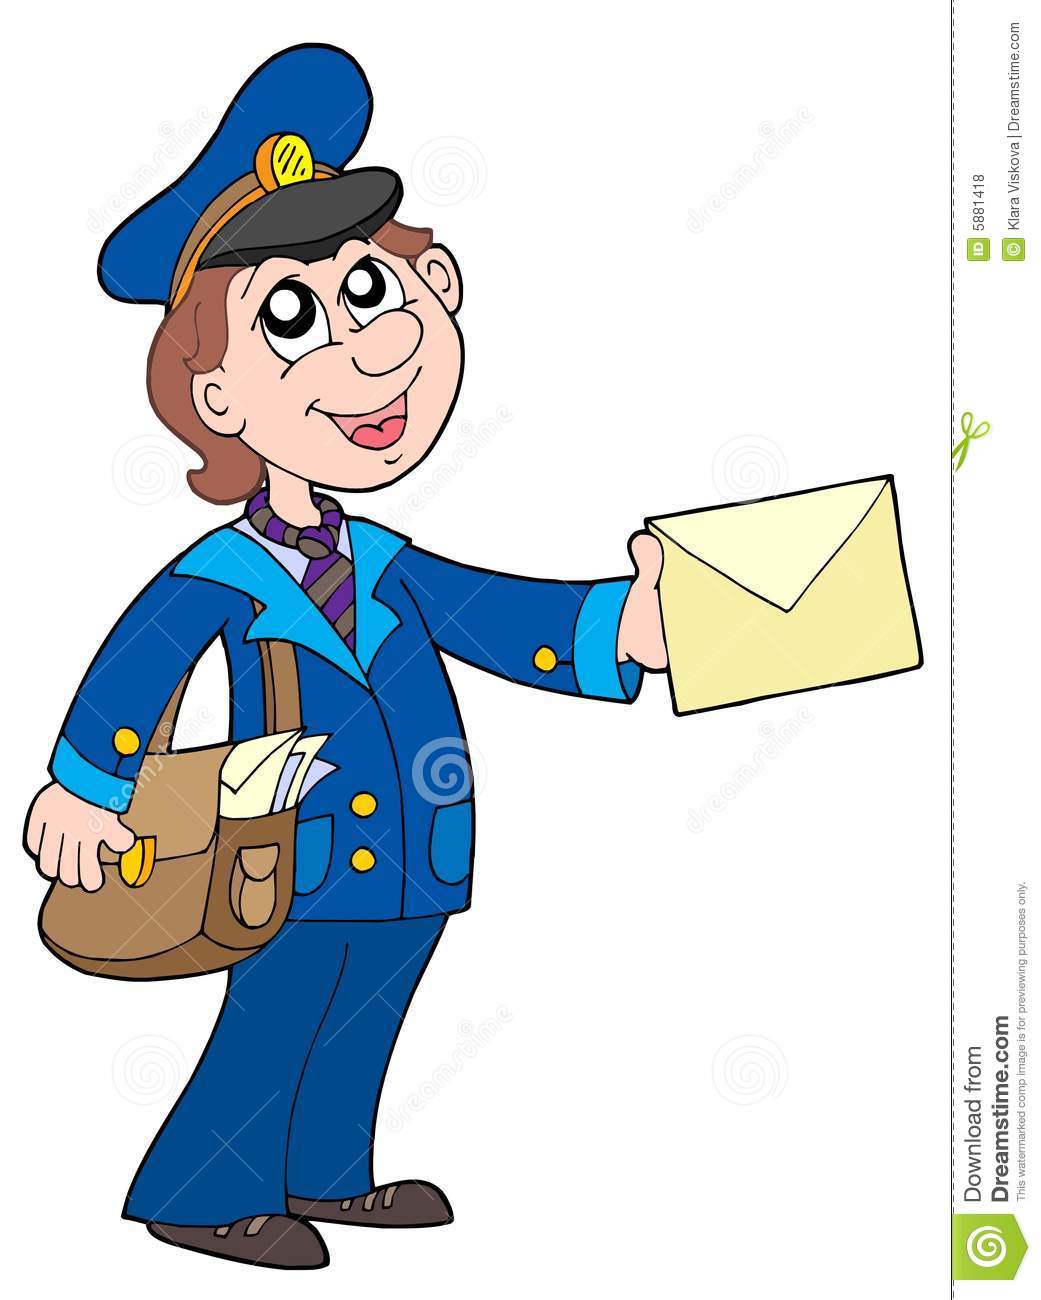 Cute Postman With Letter Royalty Free Stock Photos   Image  5881418